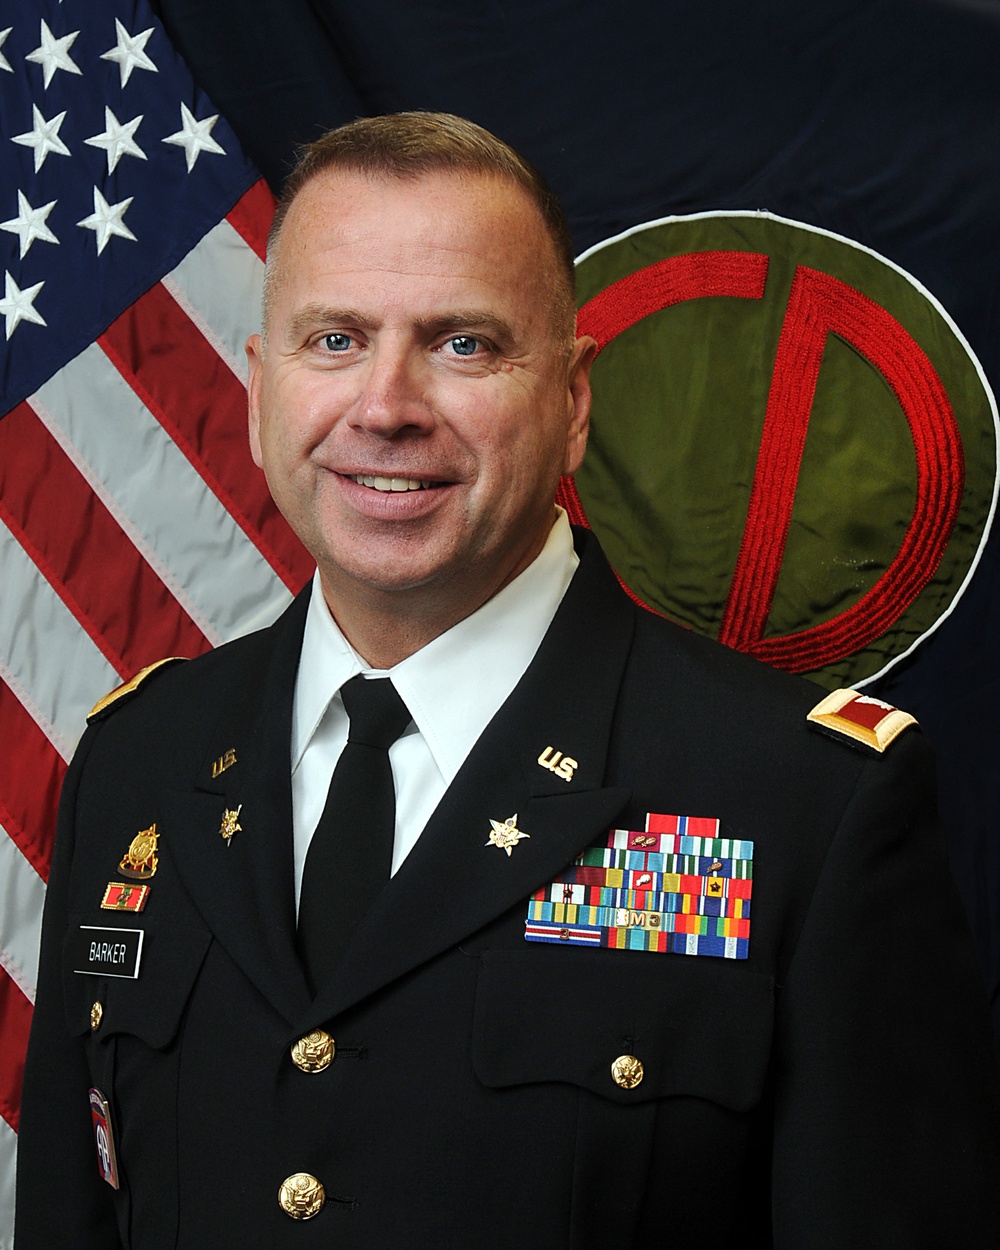 DVIDS - News - Army Reserve officer selected for promotion to